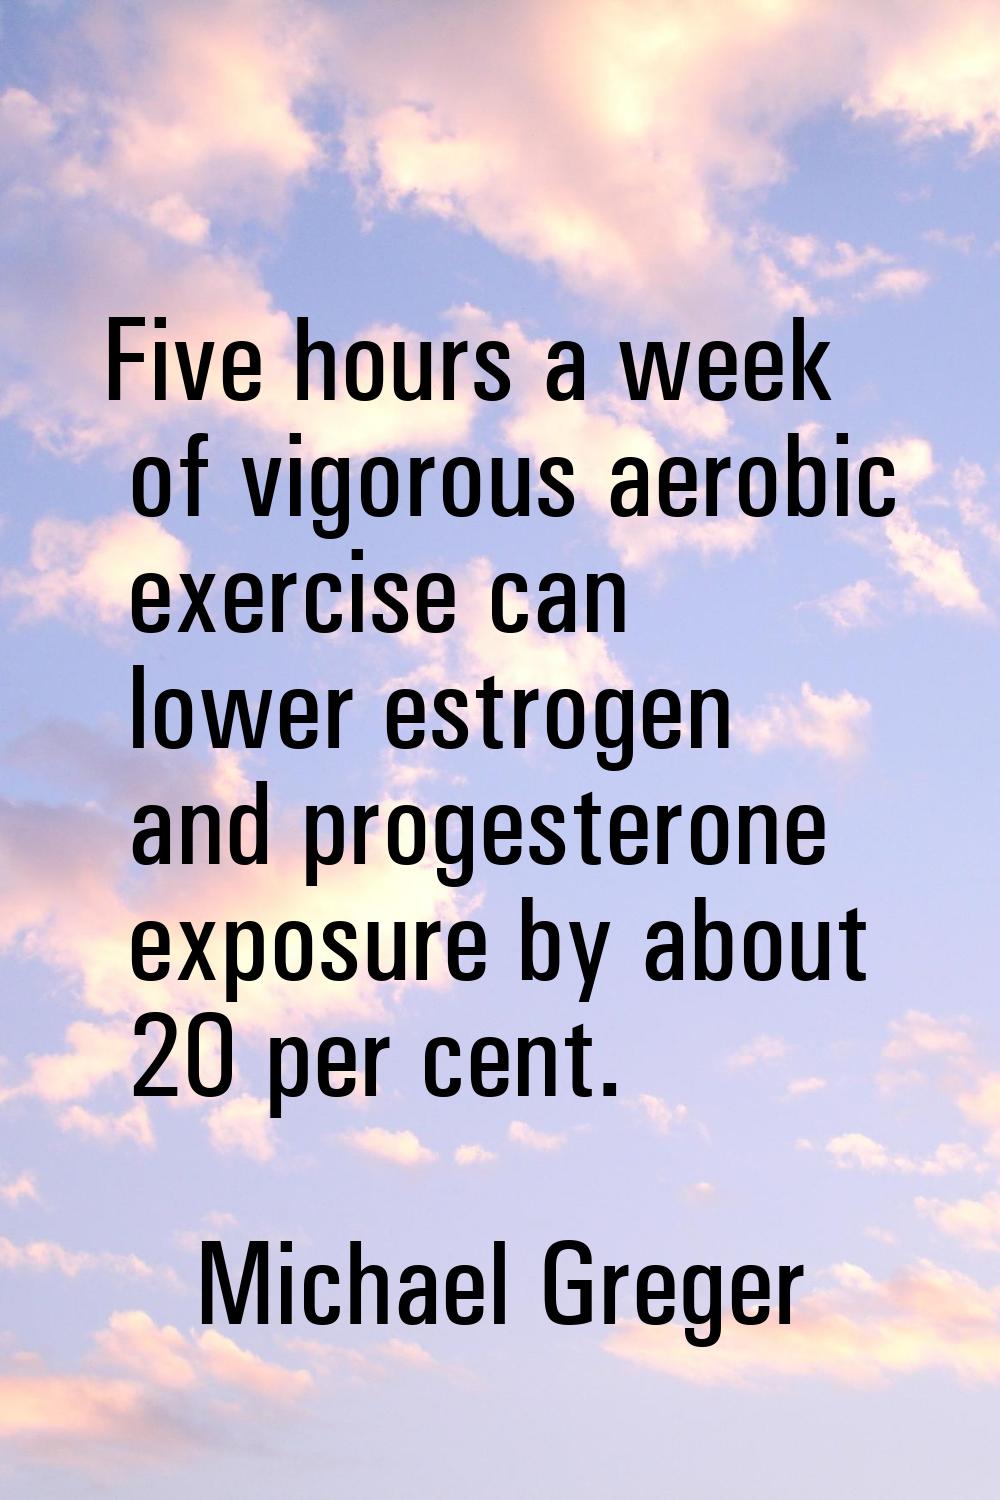 Five hours a week of vigorous aerobic exercise can lower estrogen and progesterone exposure by abou